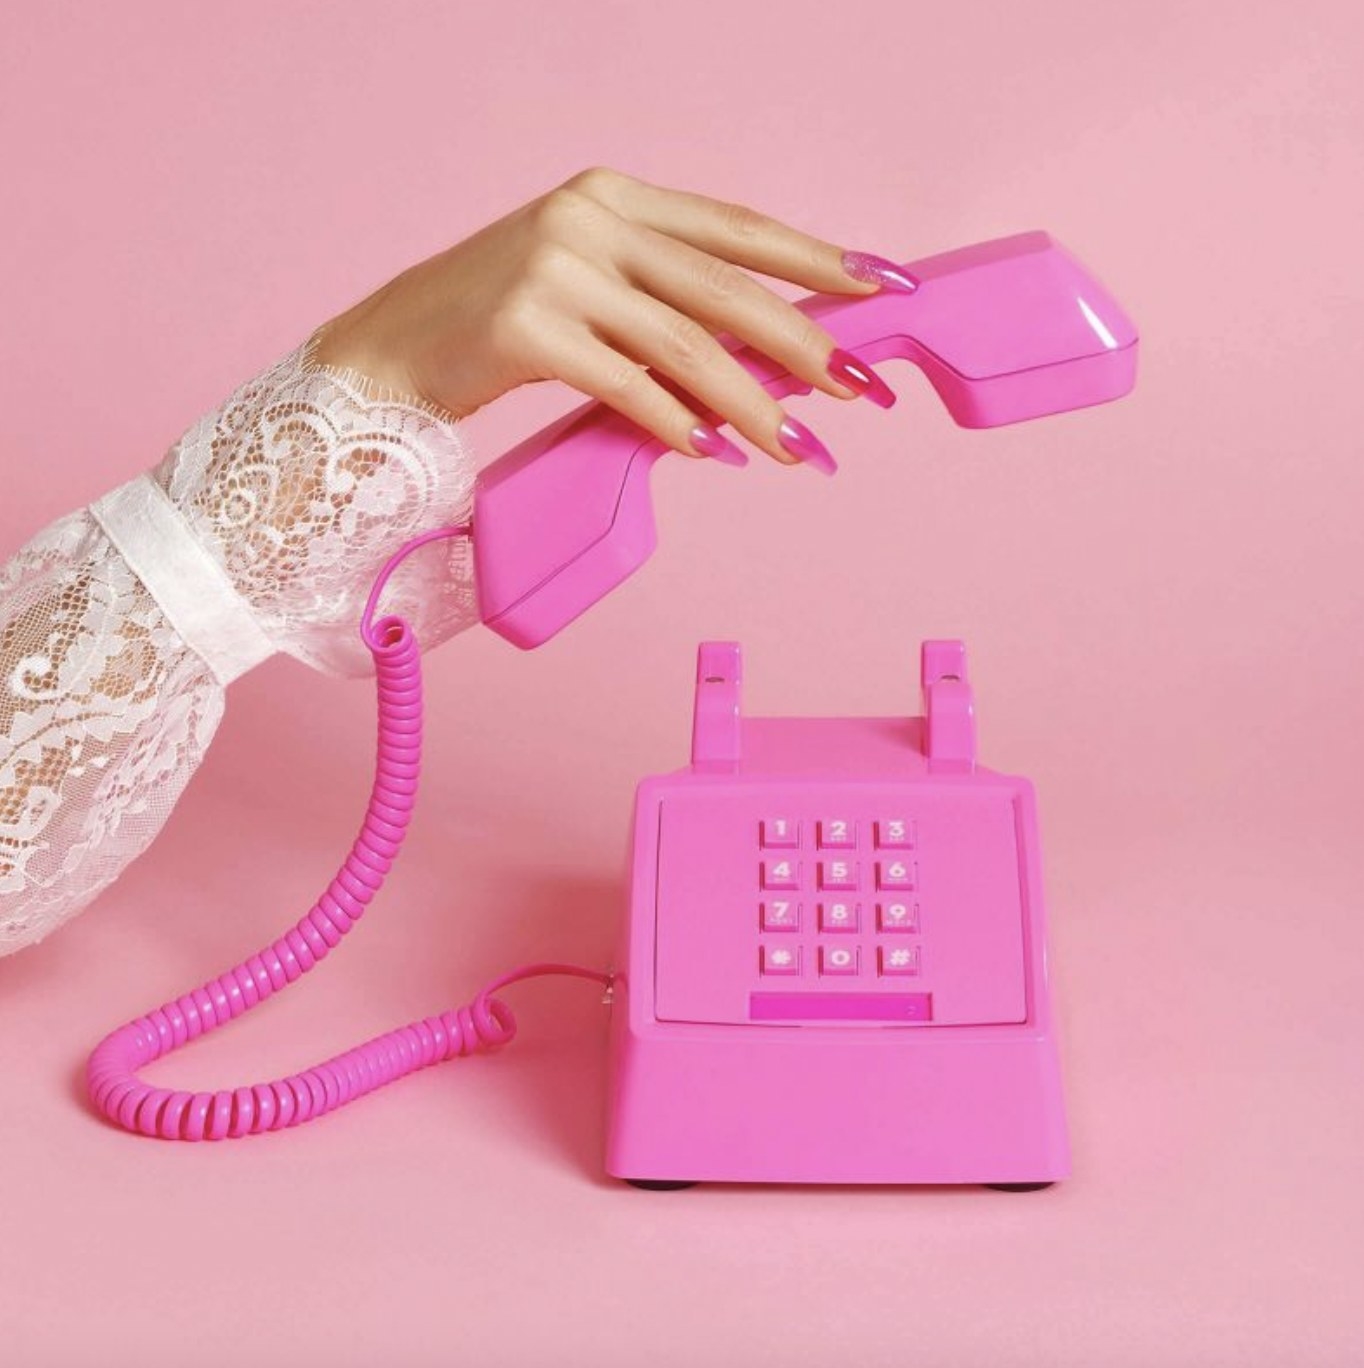 A person holding the pink telephone with a pink jelly manicure